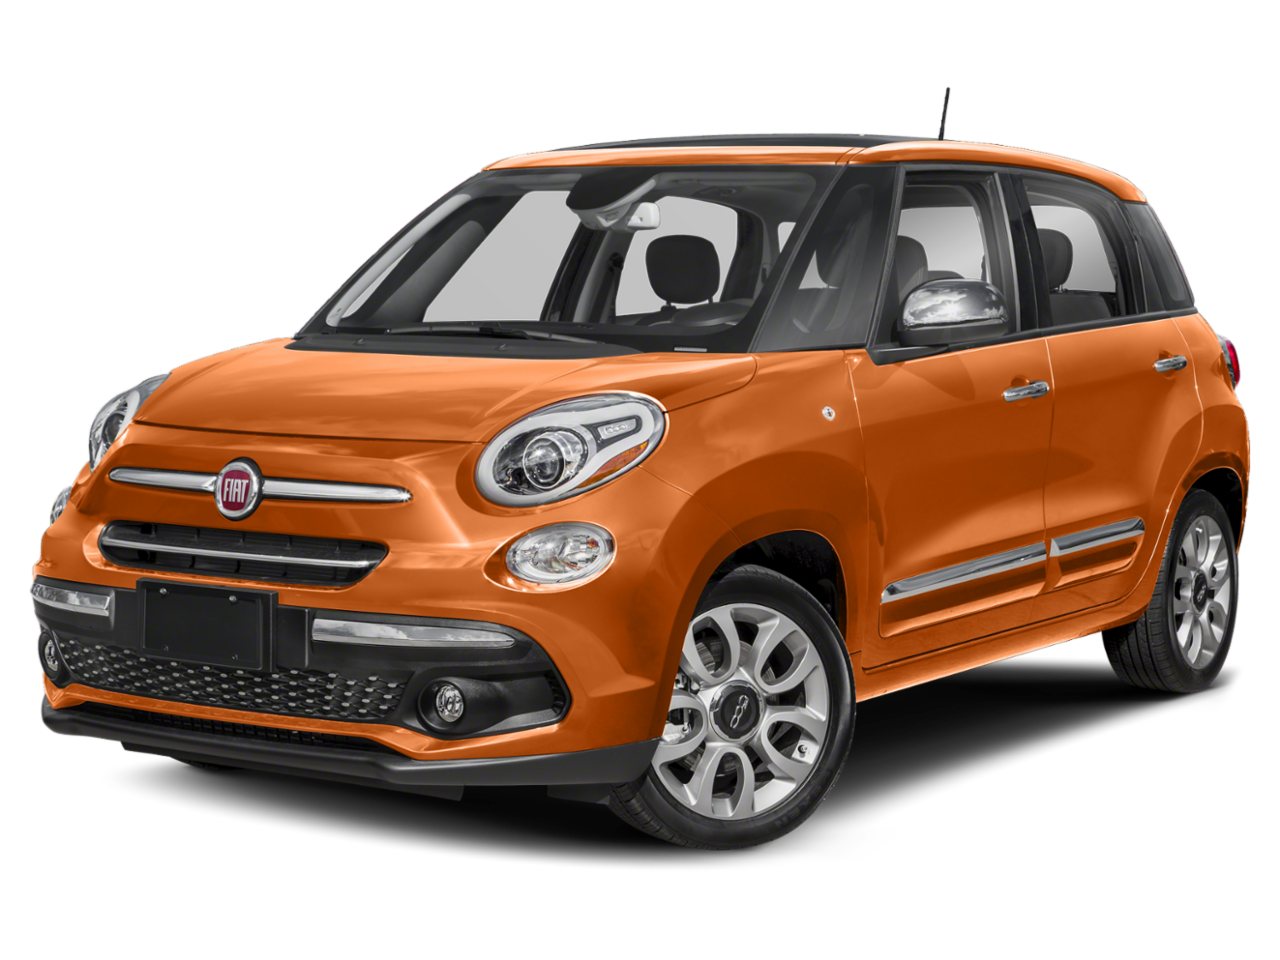 2019 Fiat 500L Repair: Service and Maintenance Cost